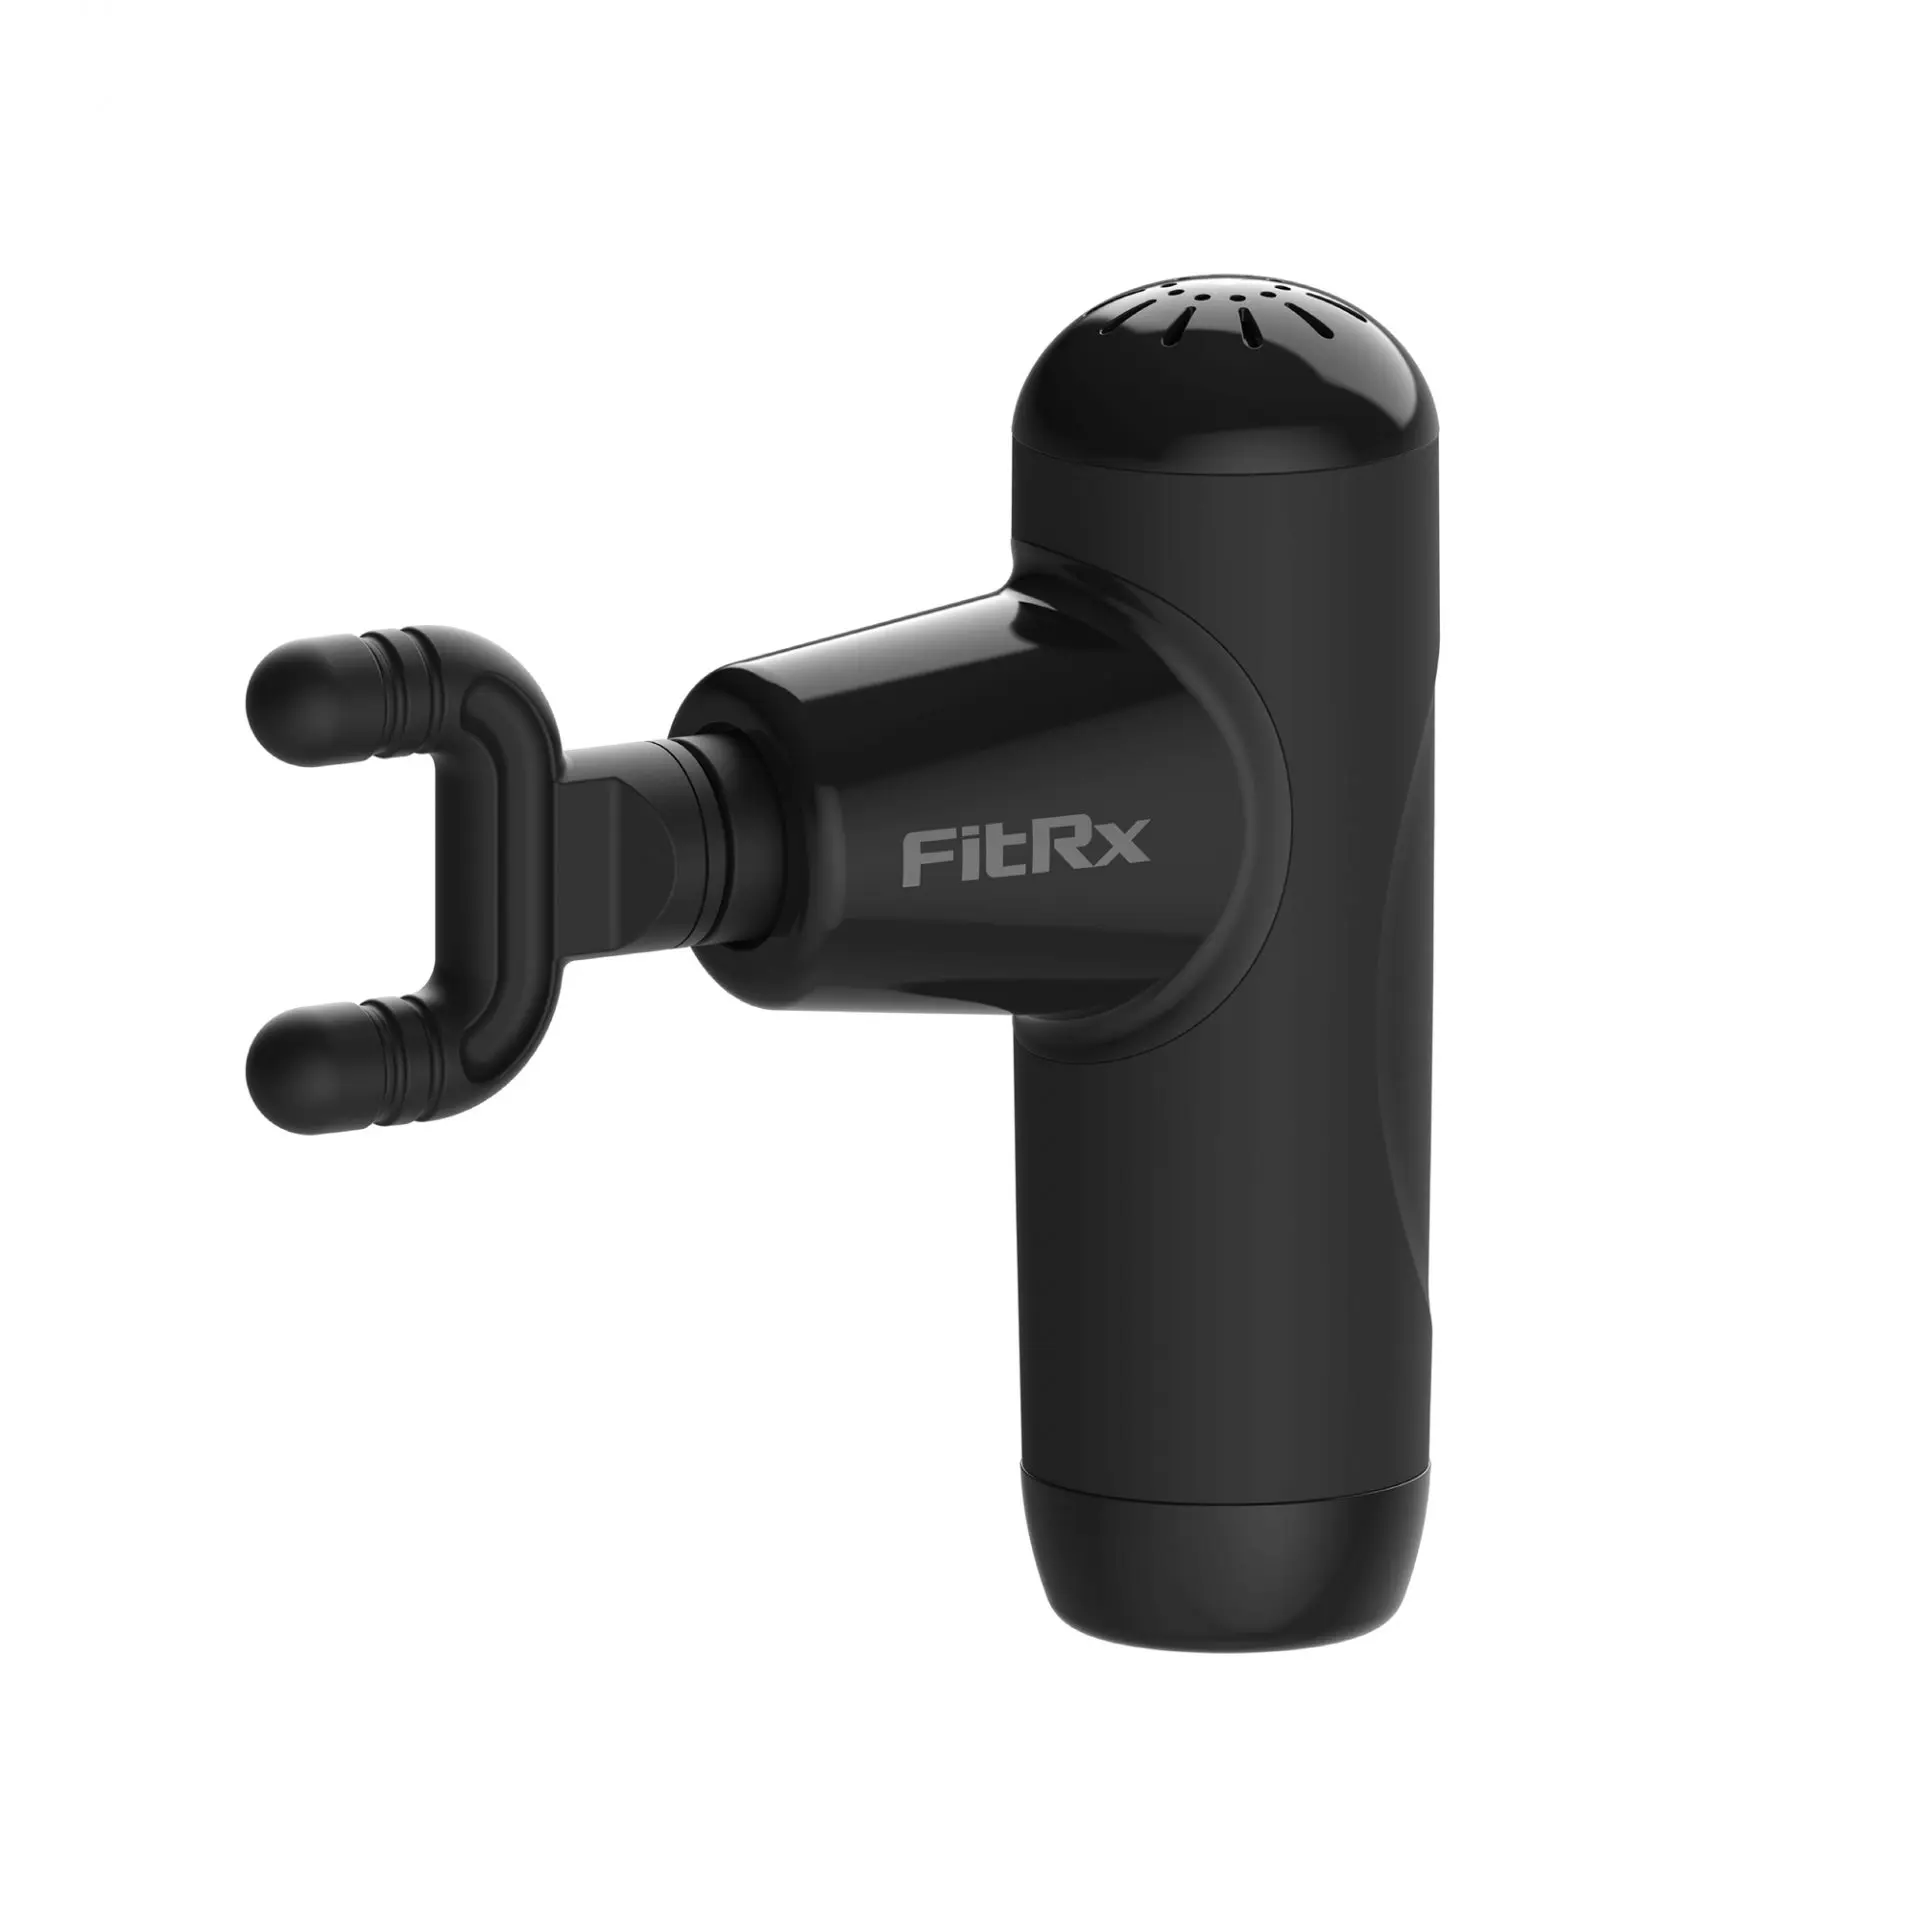 https://fitrxrecovery.com/wp-content/uploads/2023/02/fitrx_max_mini_massager-01.webp